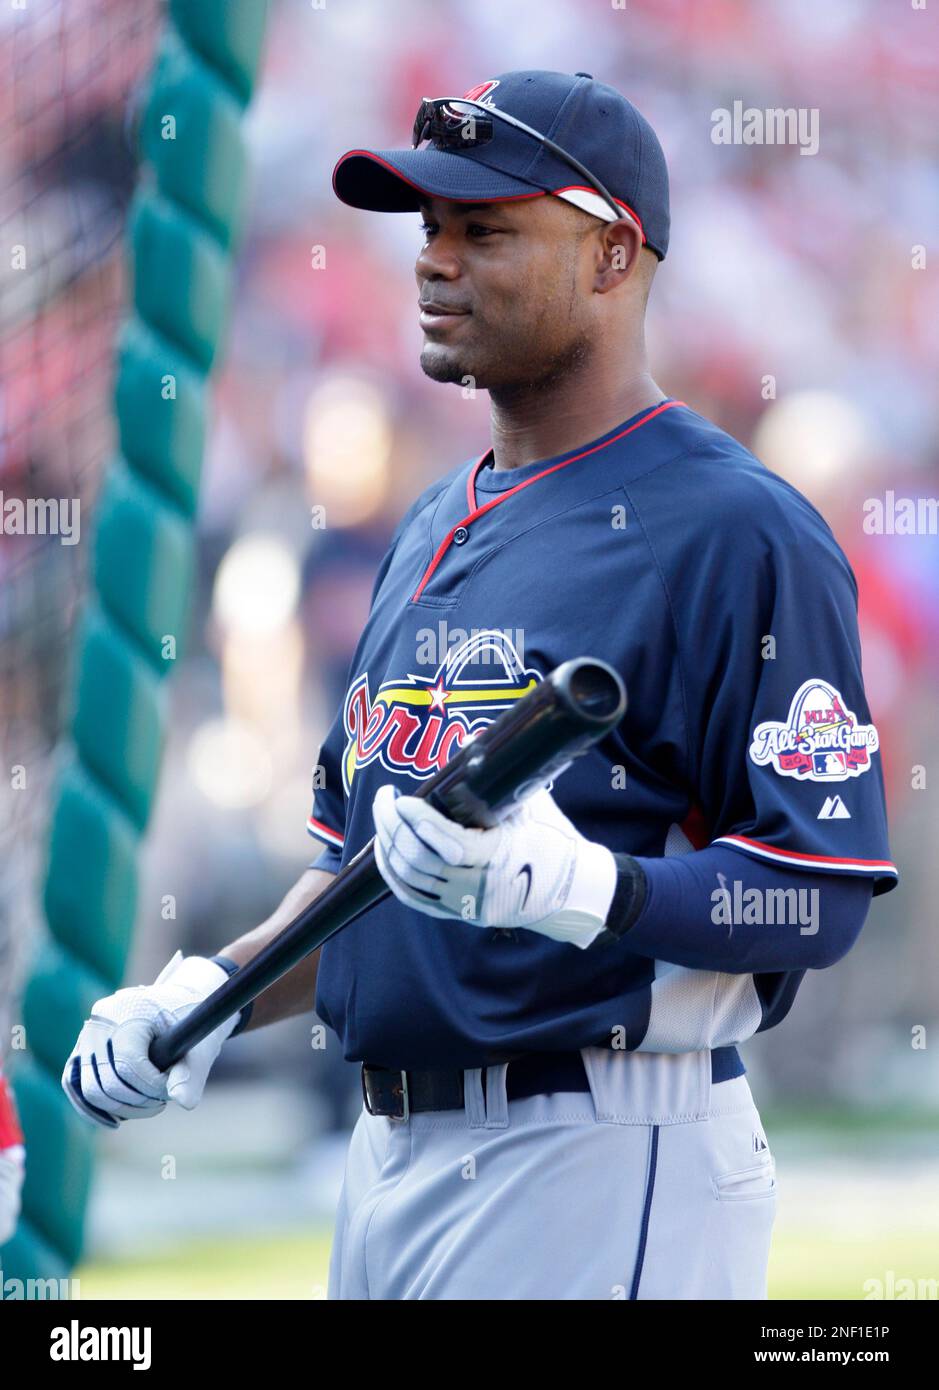 American League's Carl Crawford of the Tampa Bay Rays is seen